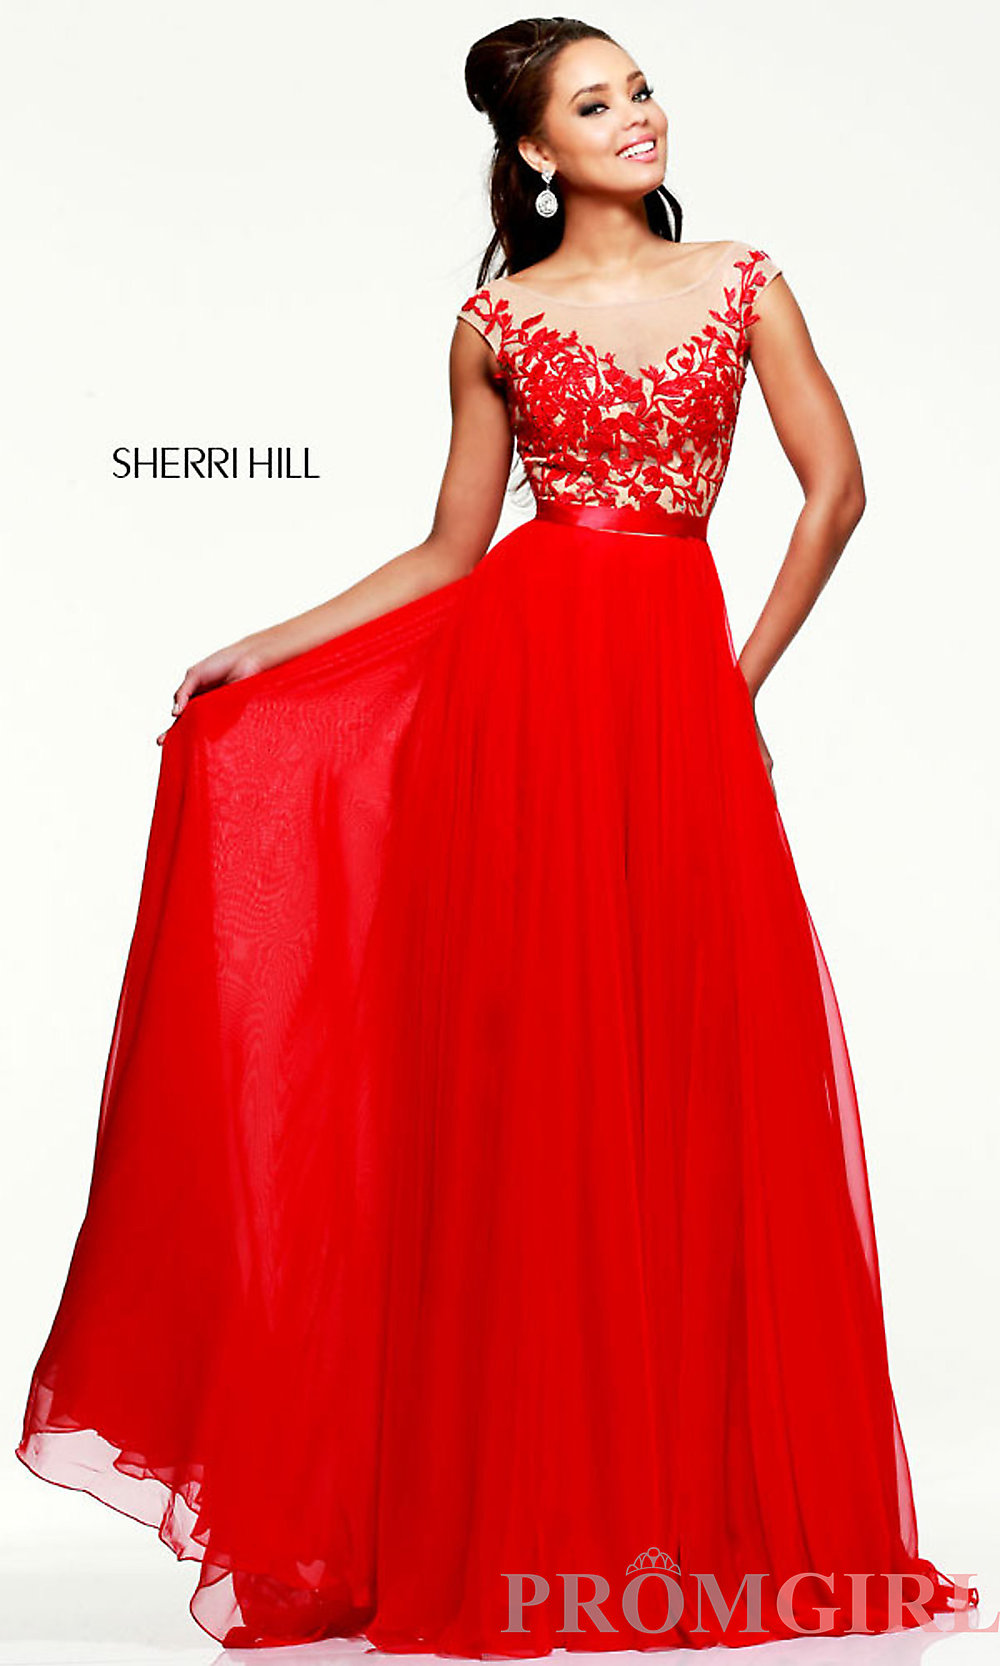 Latest Fancy Gowns, Prom and Cocktail dresses for Weddings and Parties 2014-2015 (15)